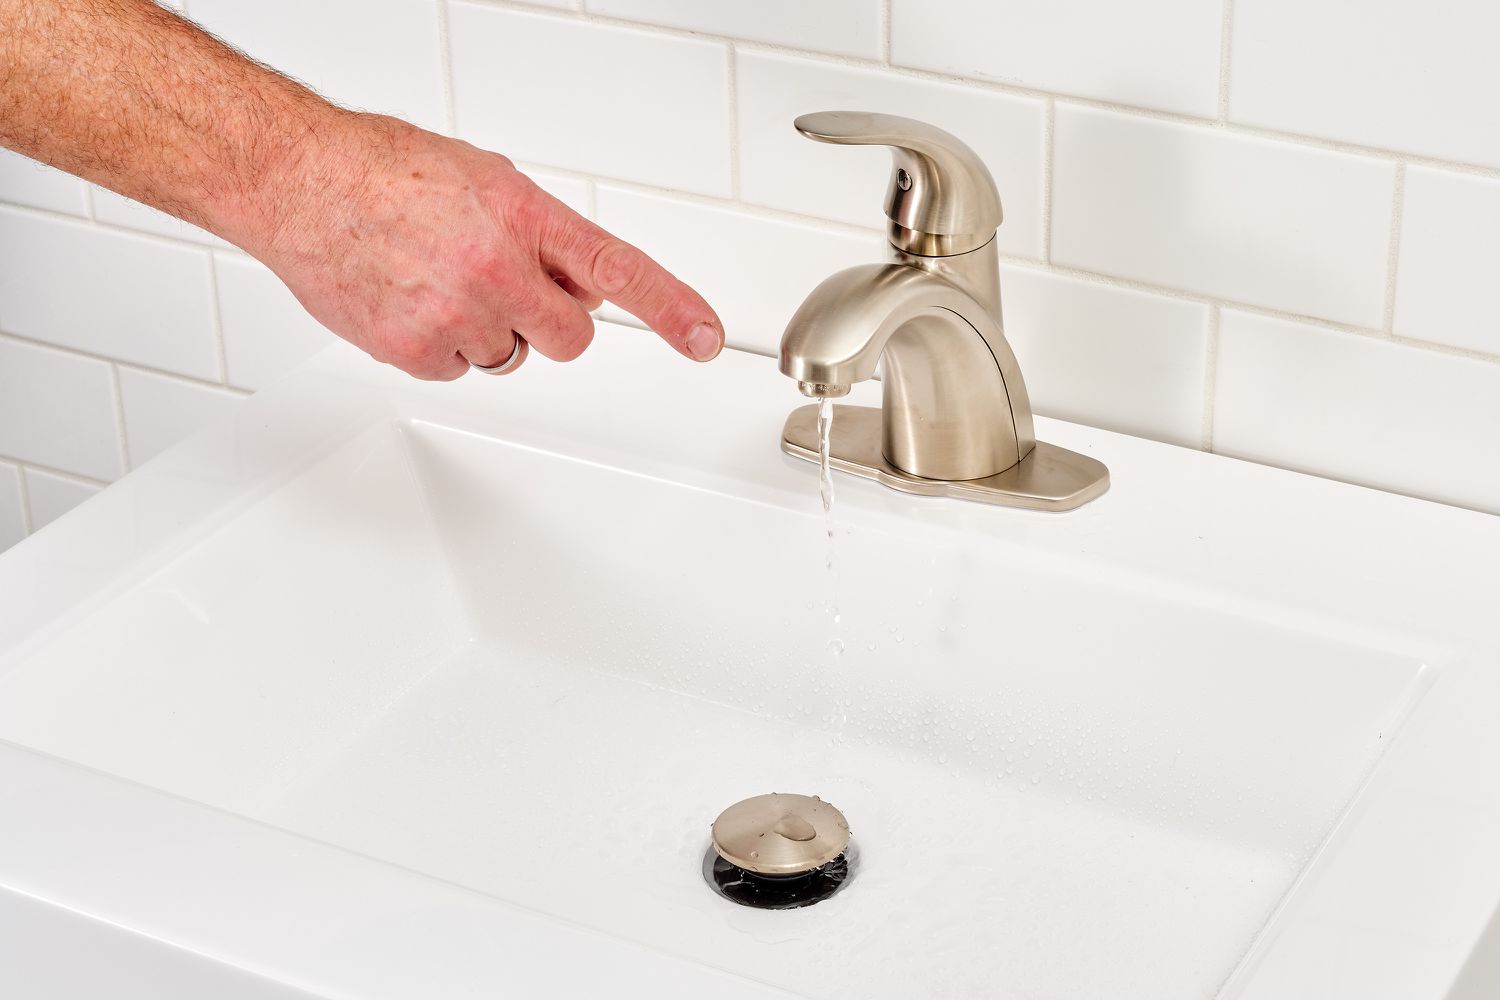 How To Fix A Leaky Single Handle Faucet